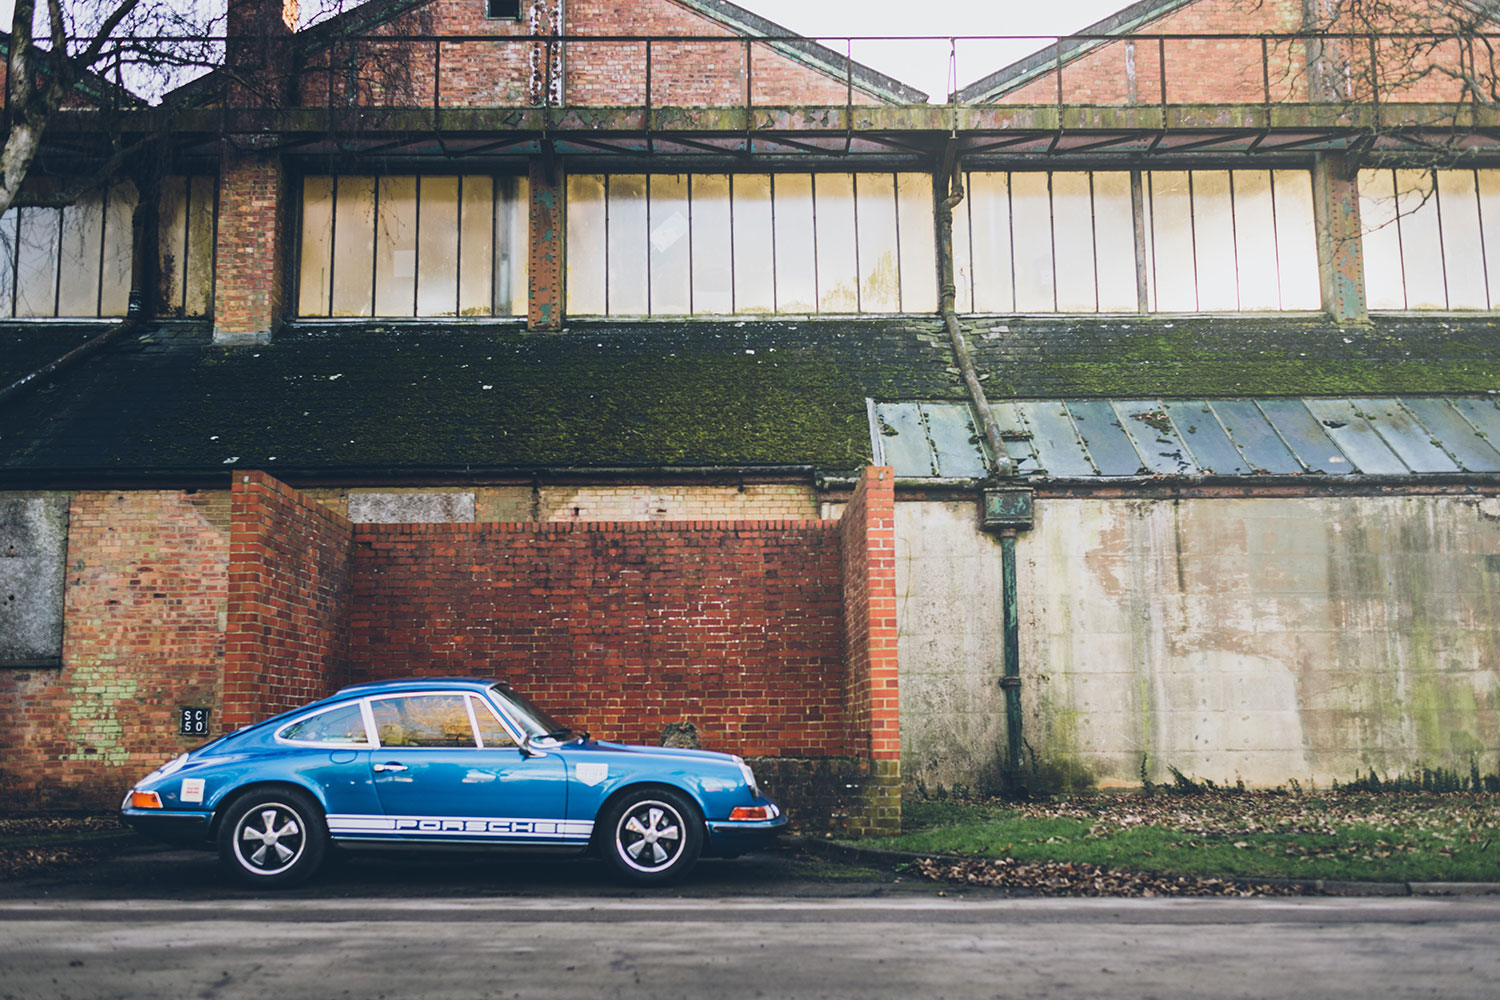 The Blue Pearl at Bicester Sunday Scramble - 1972 Porsche 911T